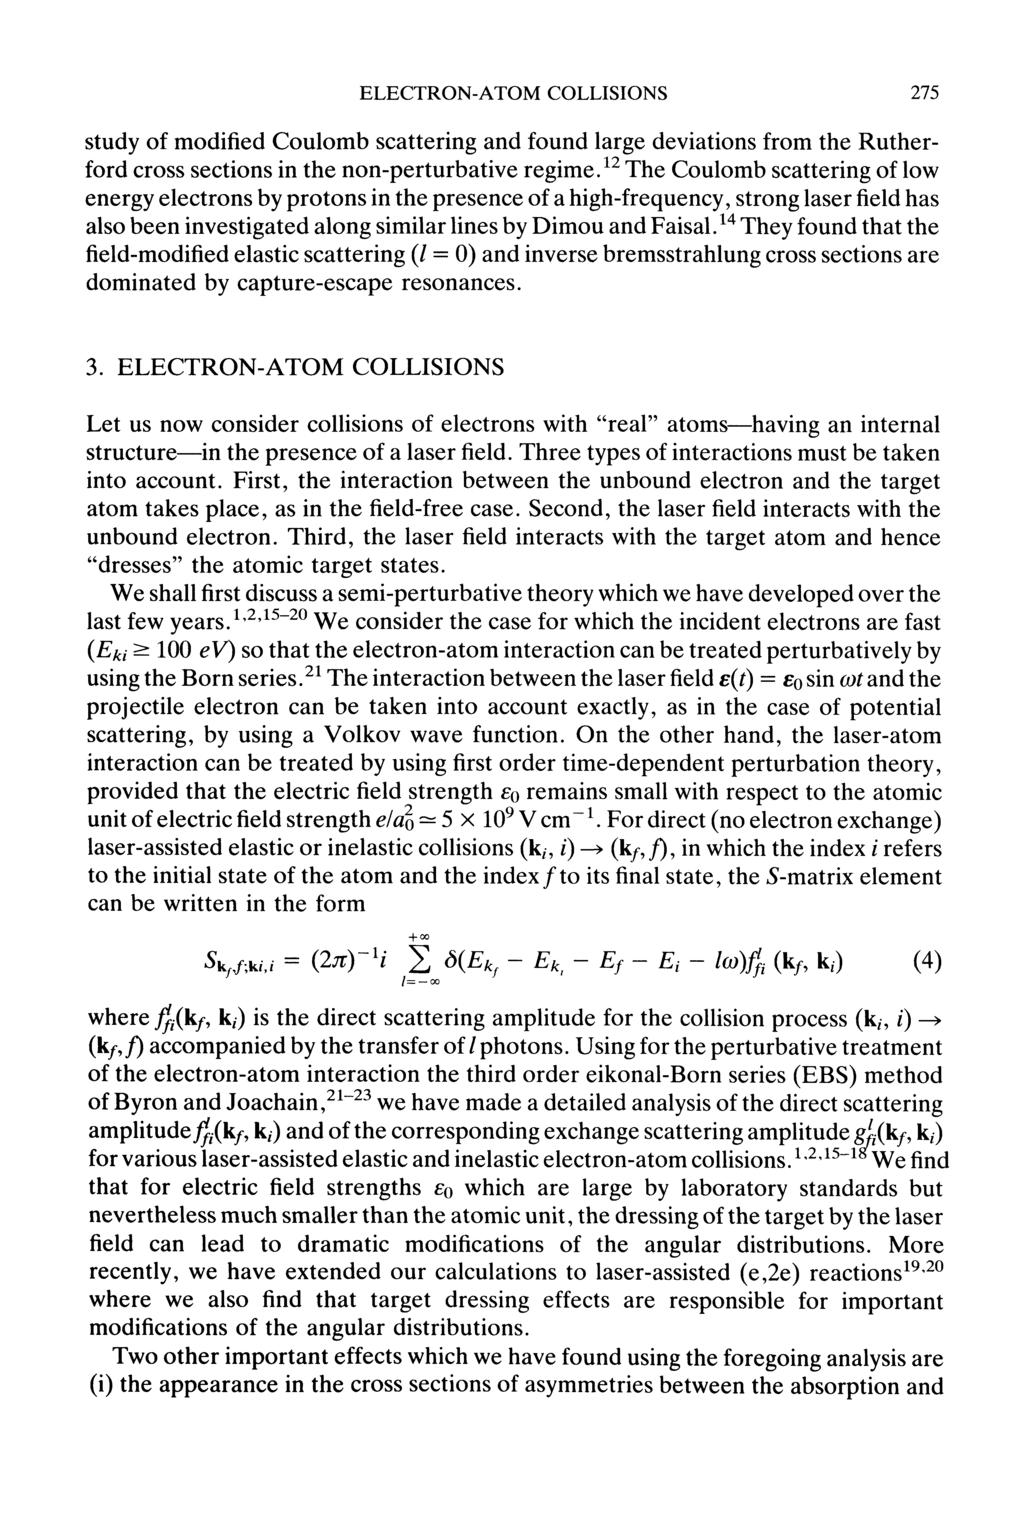 ELECTRON-ATOM COLLISIONS 275 study of modified Coulomb scattering and found large deviations from the Rutherford cross sections in the non-perturbative regime.